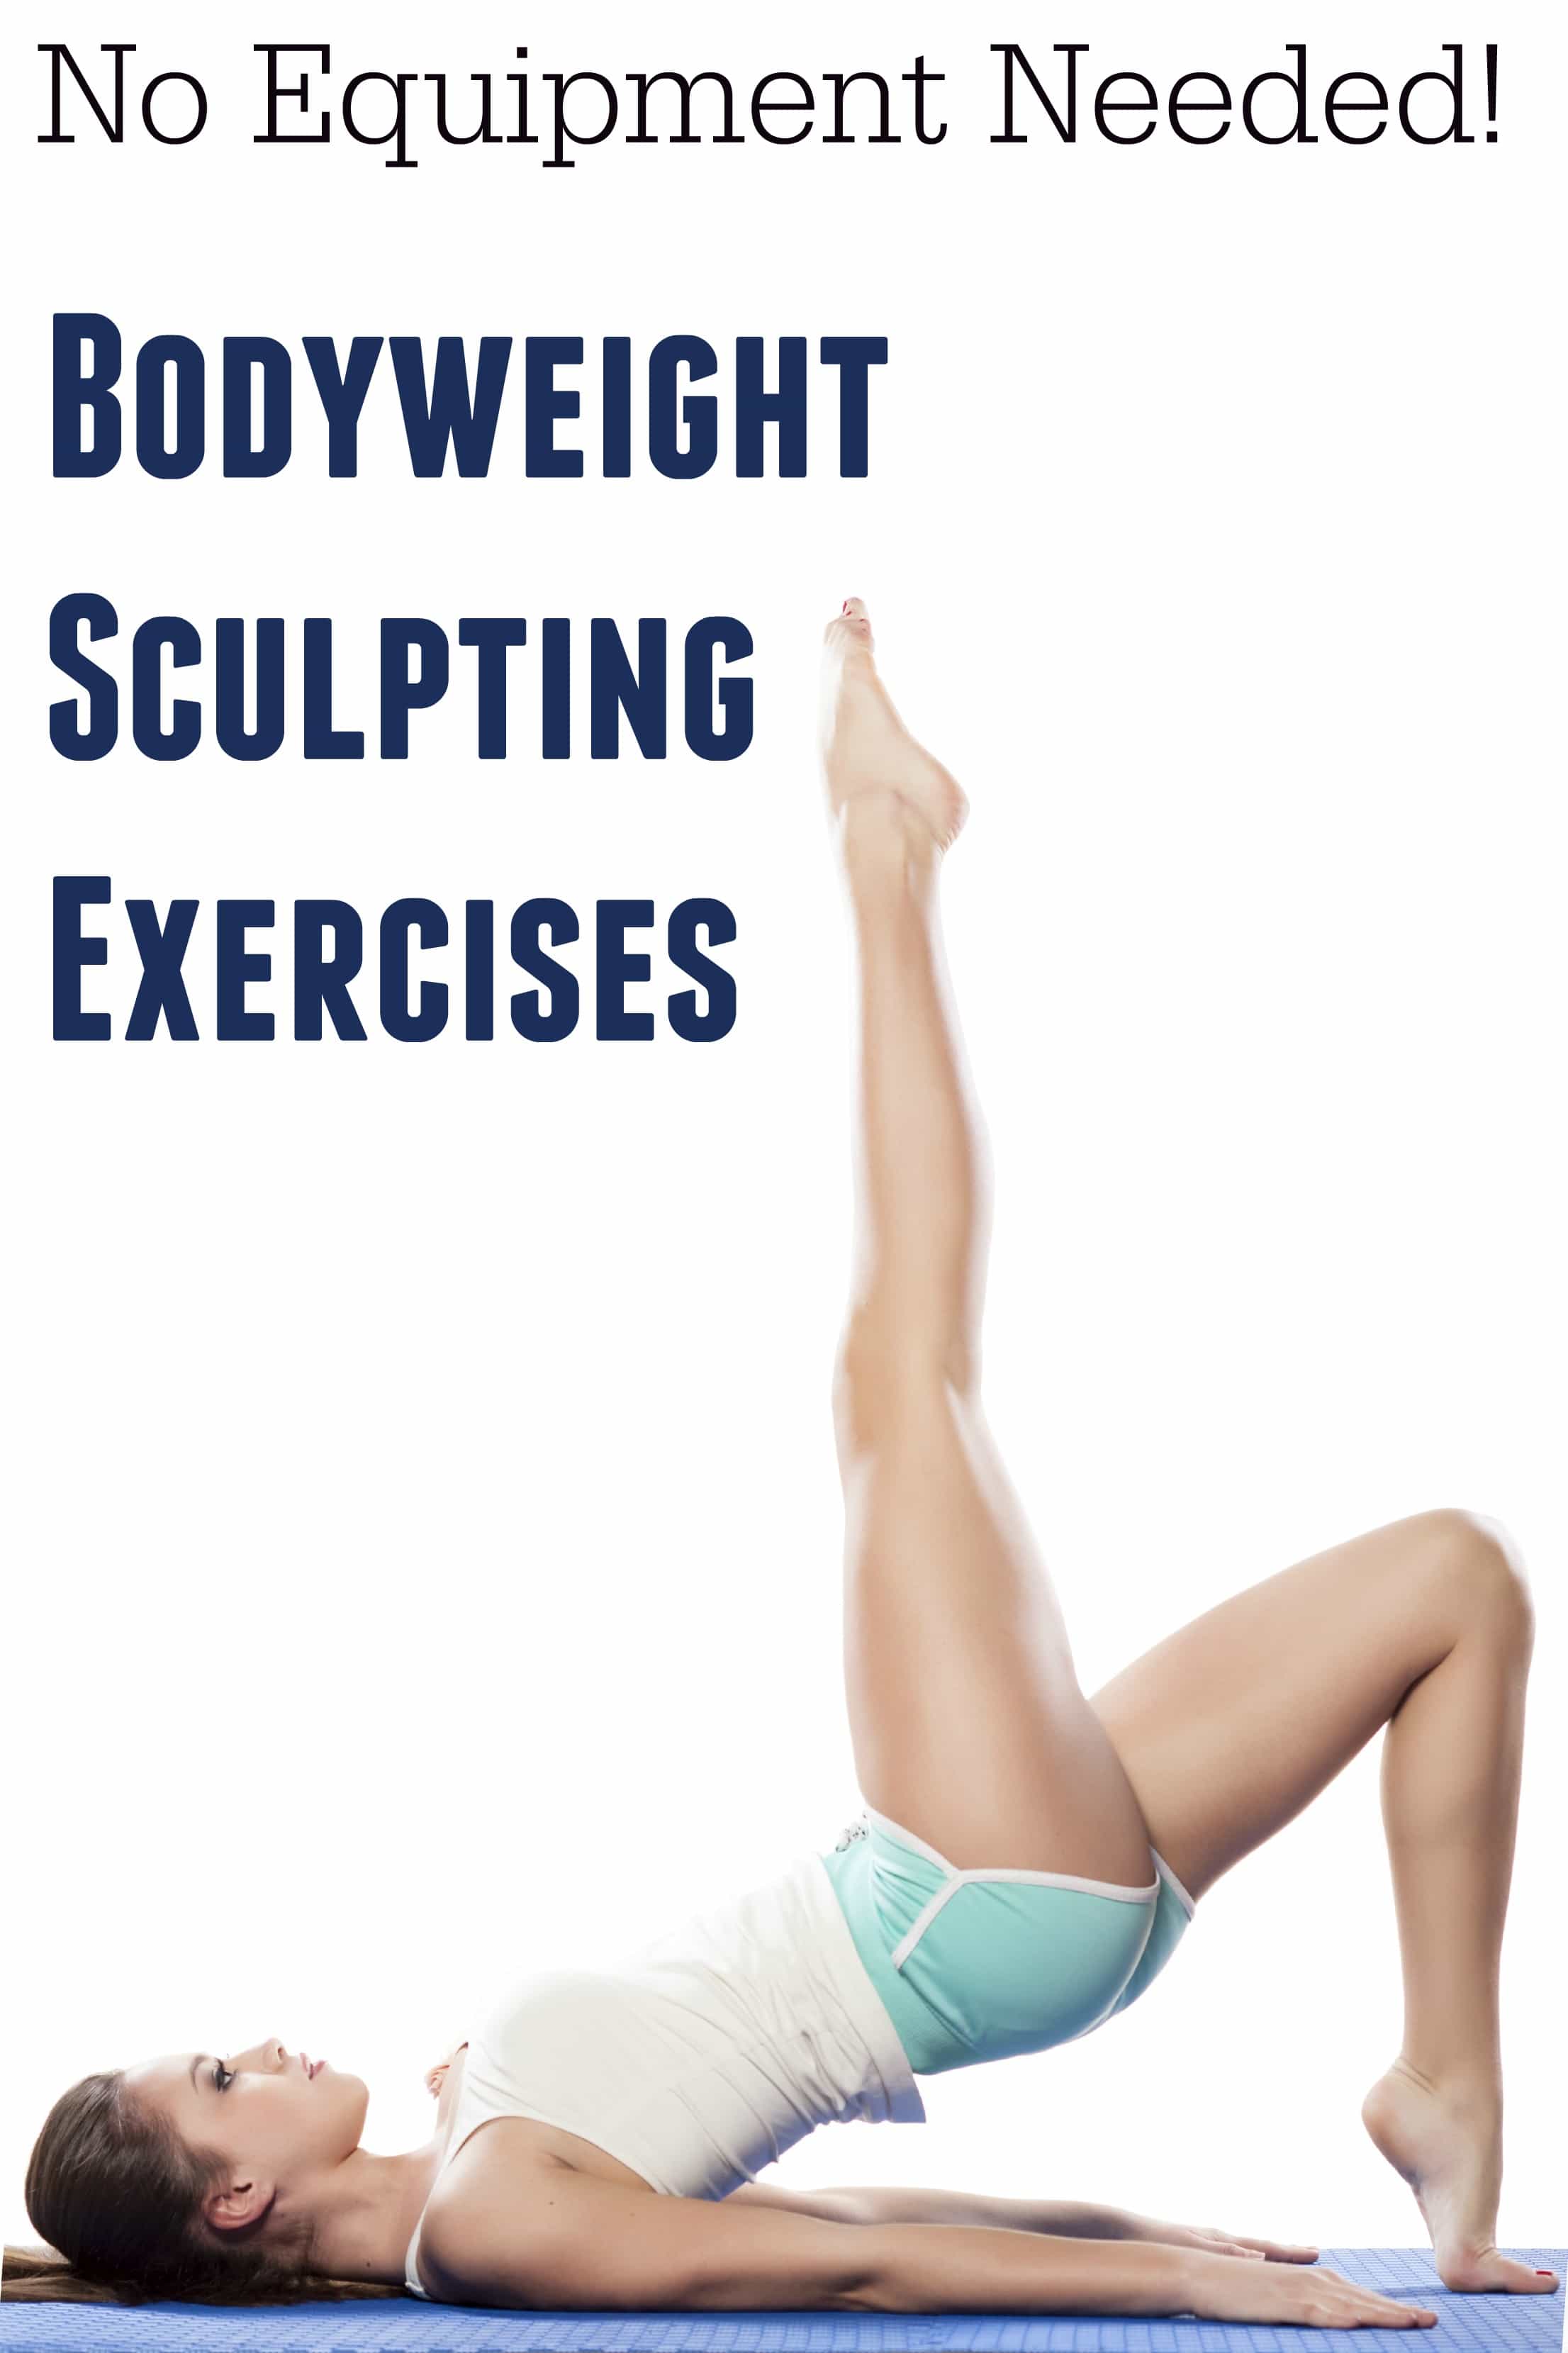 Body Weight Exercises For Sculpting - Try these five body weight exercises for sculpting muscles to sculpt your arms, legs, core, and abs without equipment.